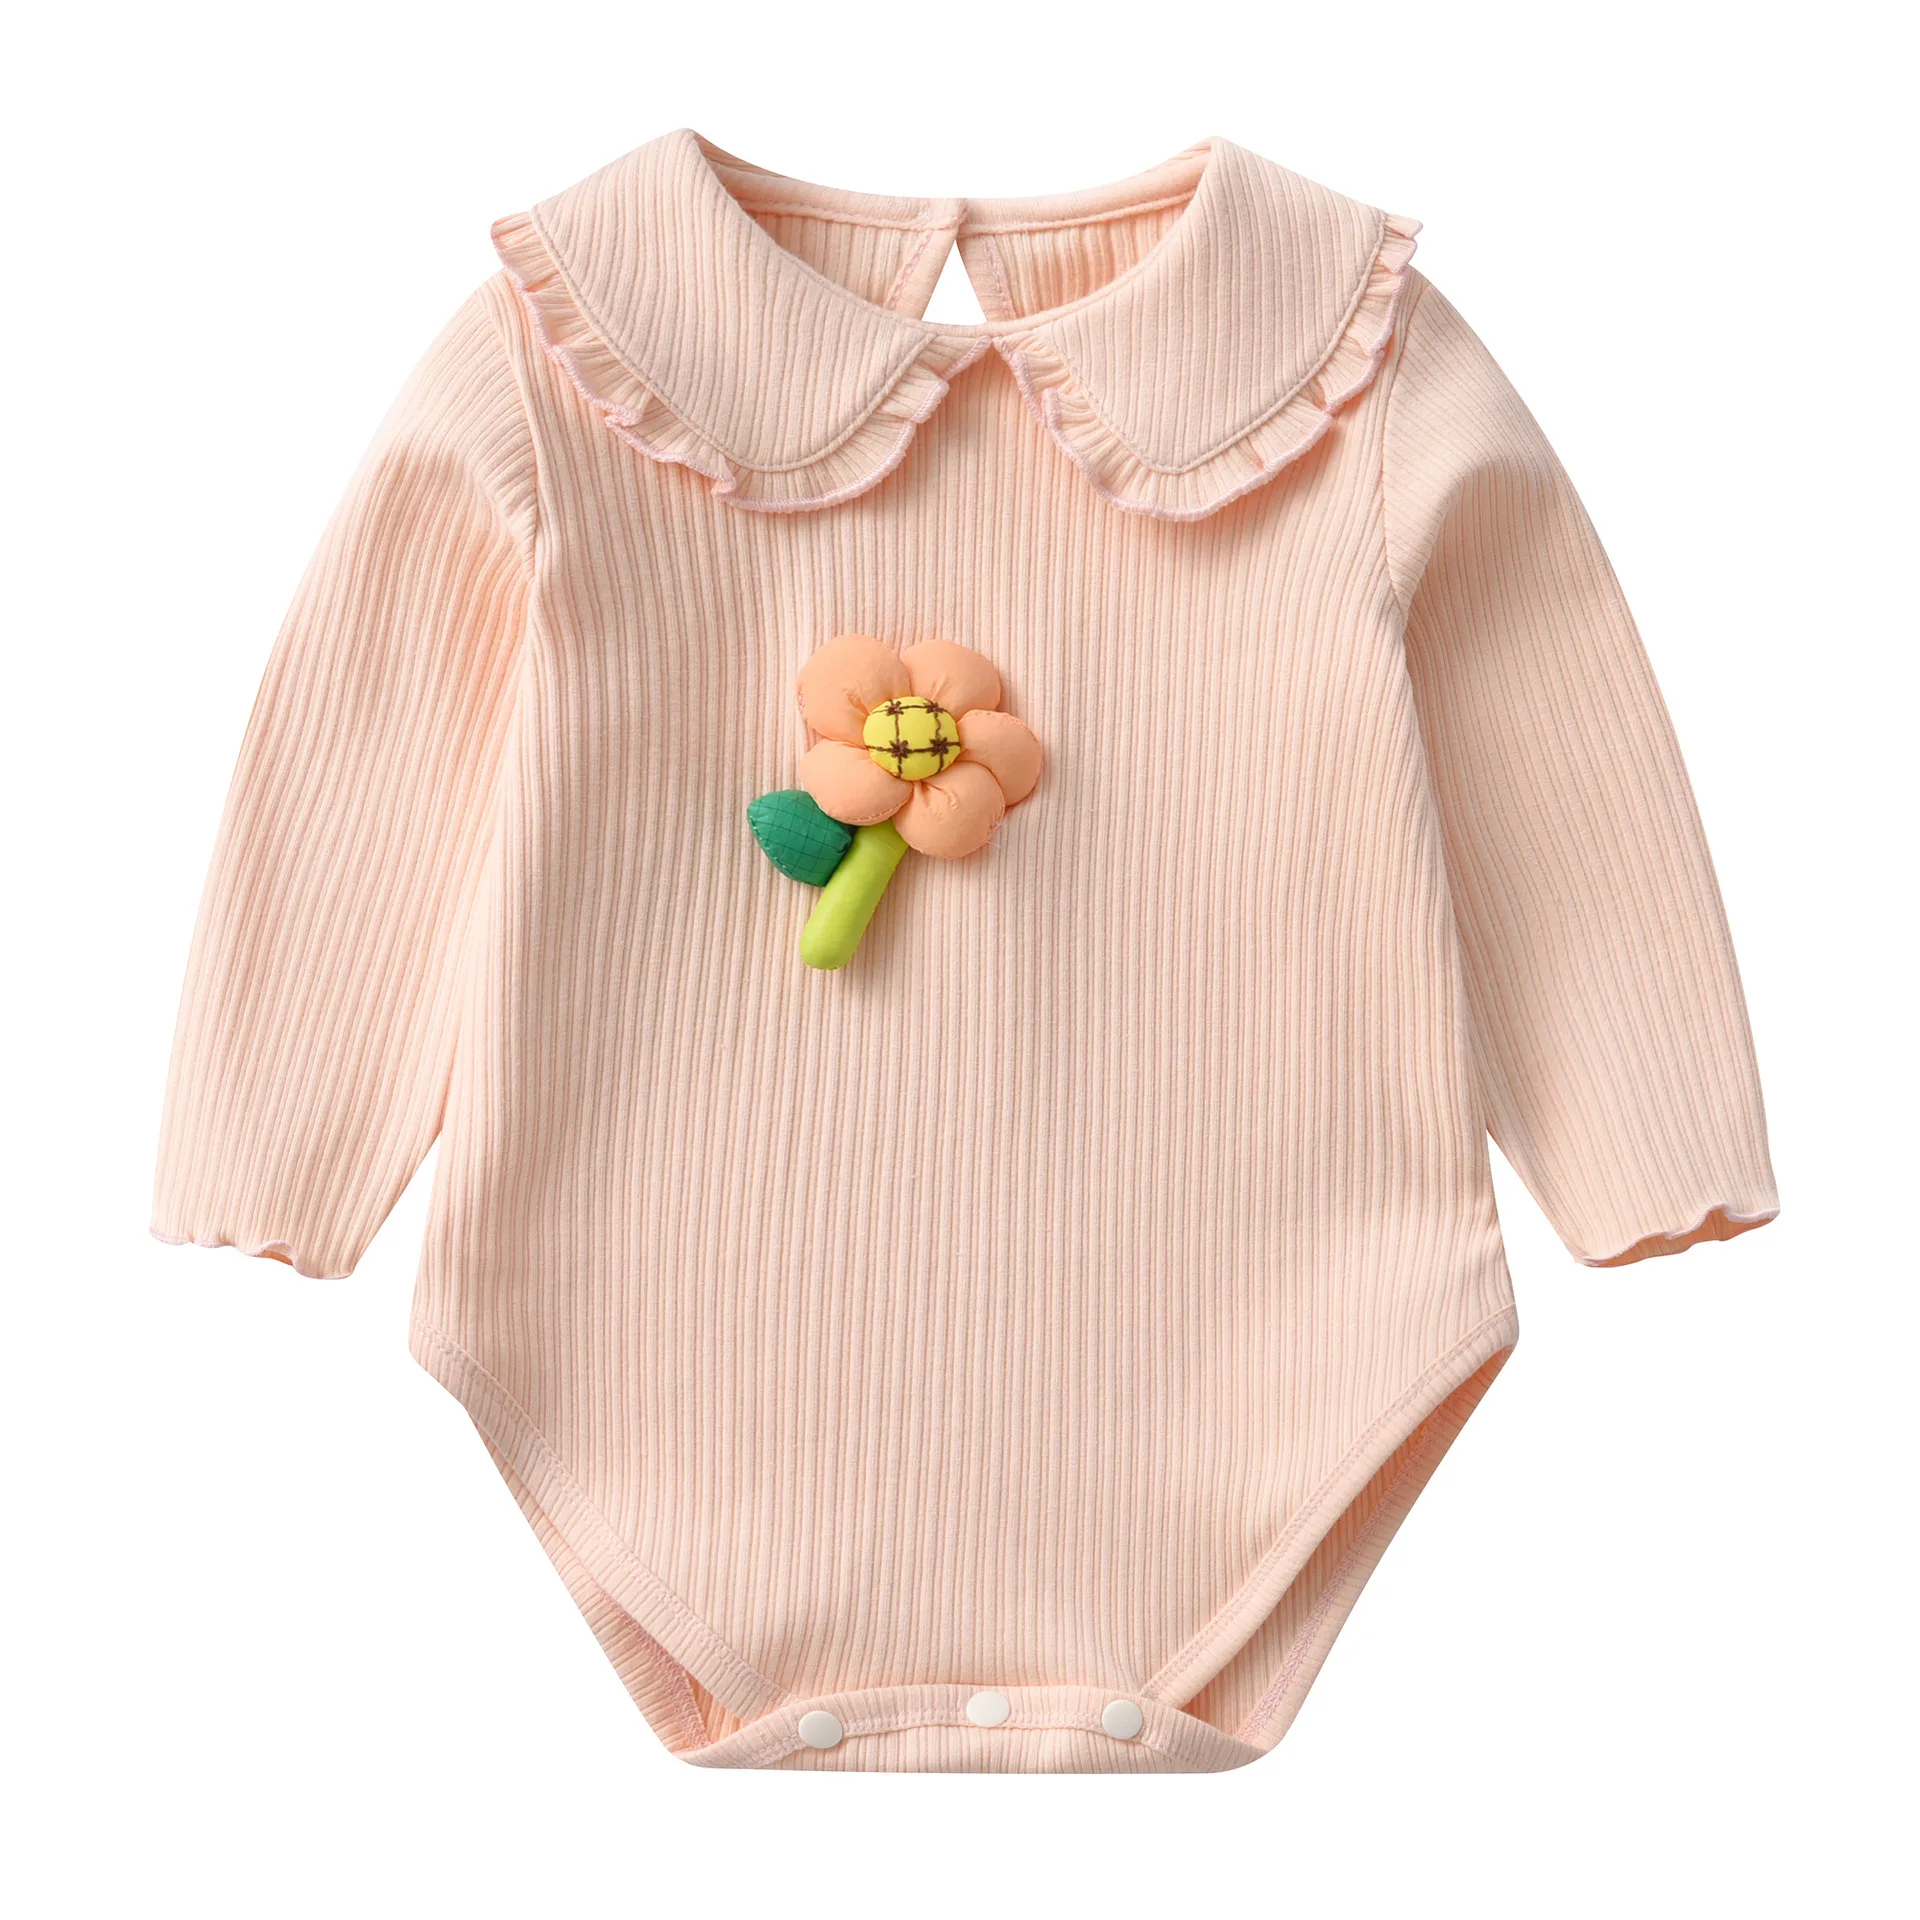 Wholesale Autumn NewBorn Cute Long Sleeve Cotton Infant Girls Jumpsuits Stock Lots Baby Rompers with Flower